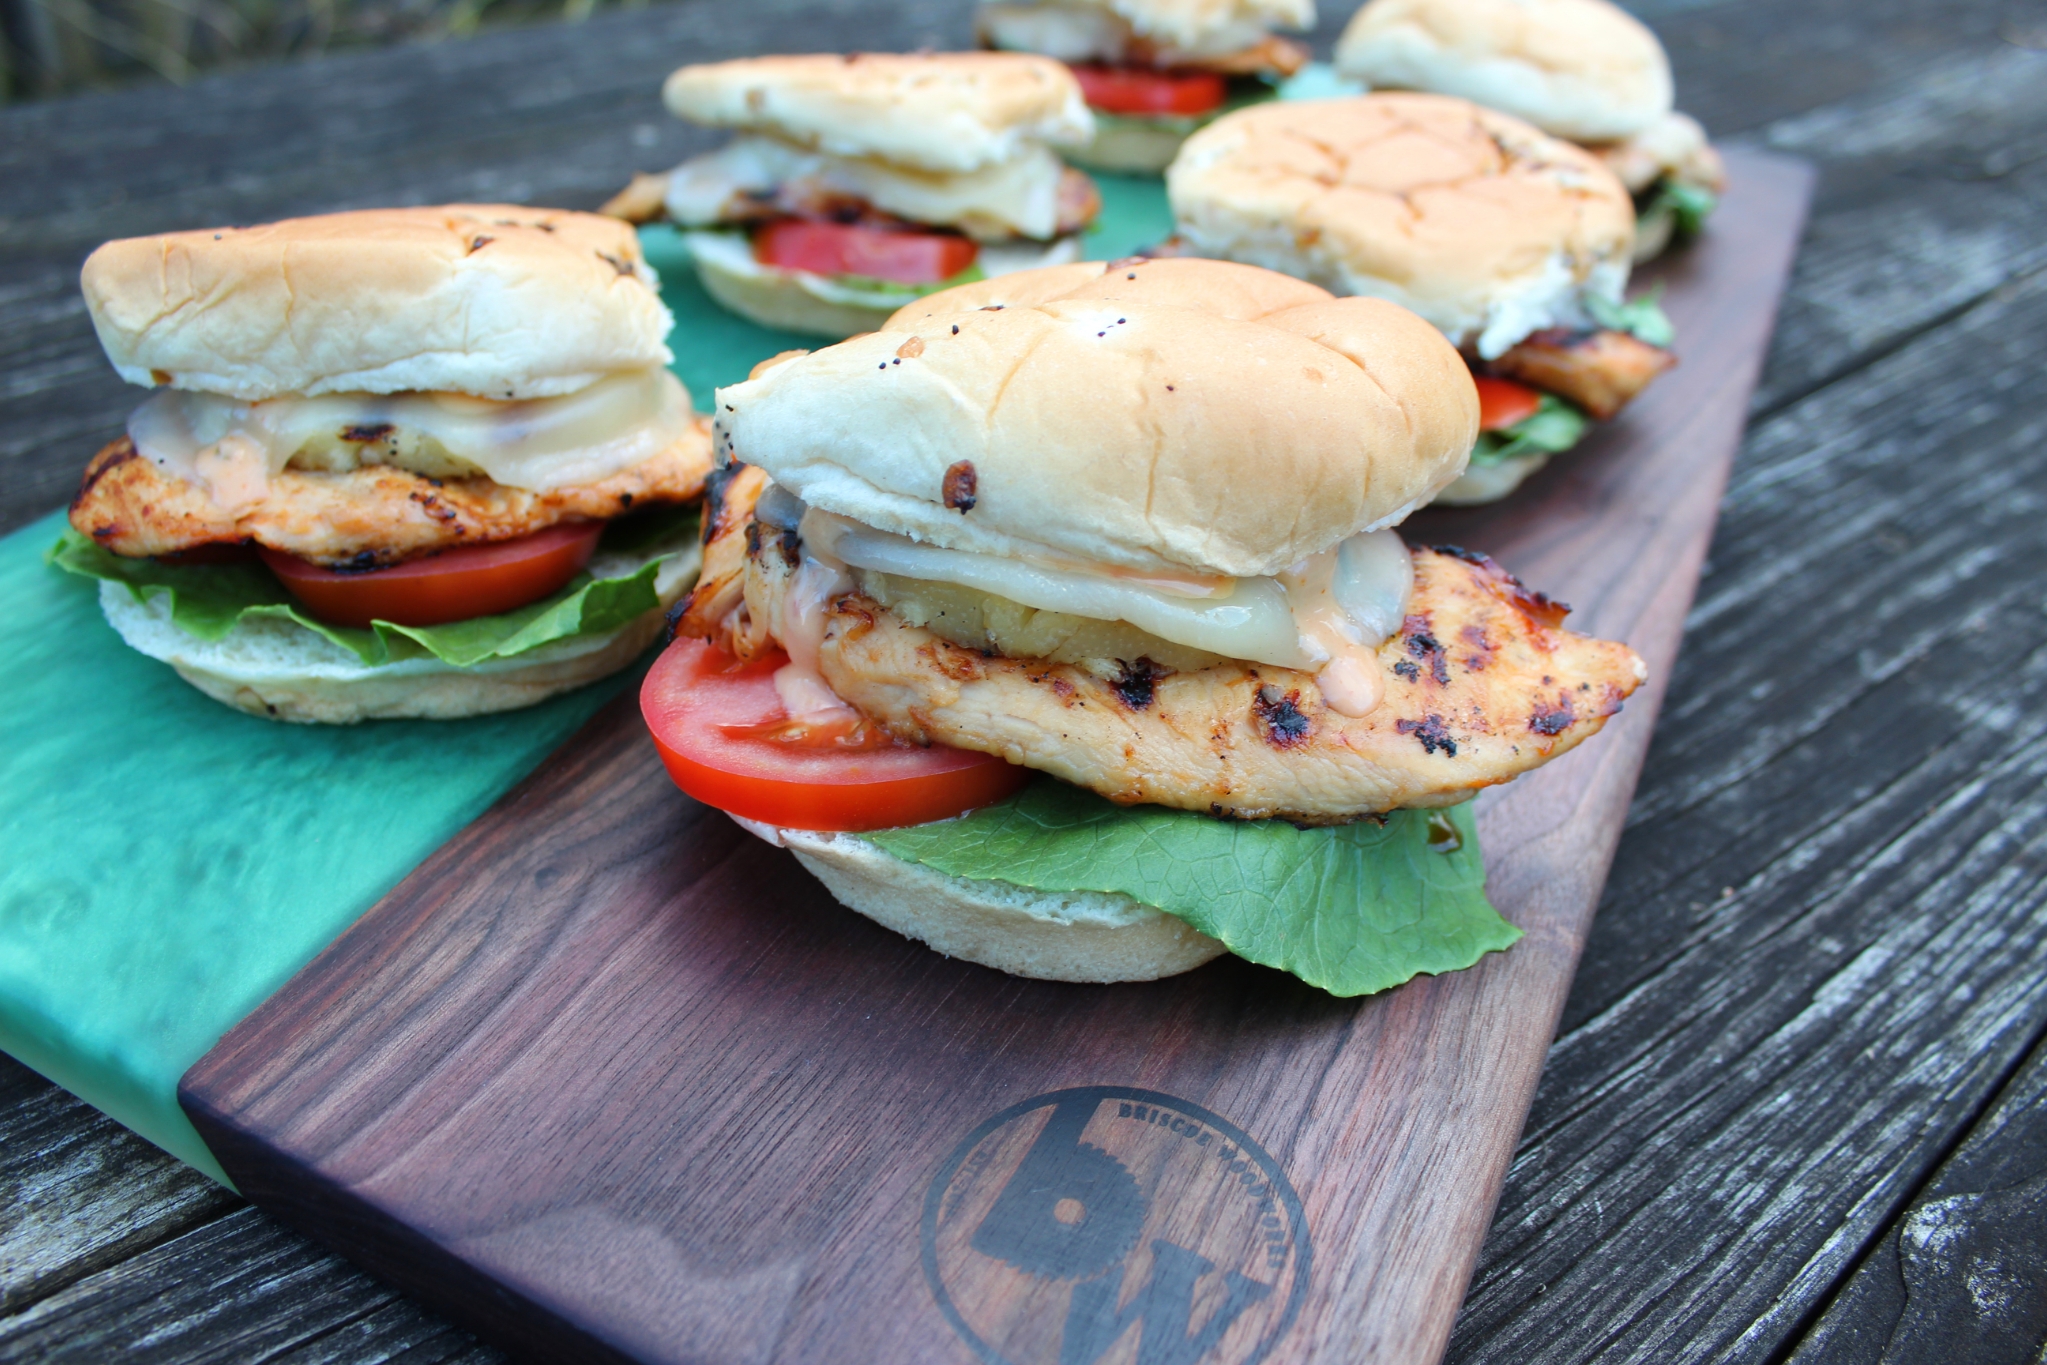 Grilled Hawaiian Chicken and Pineapple Sandwiches